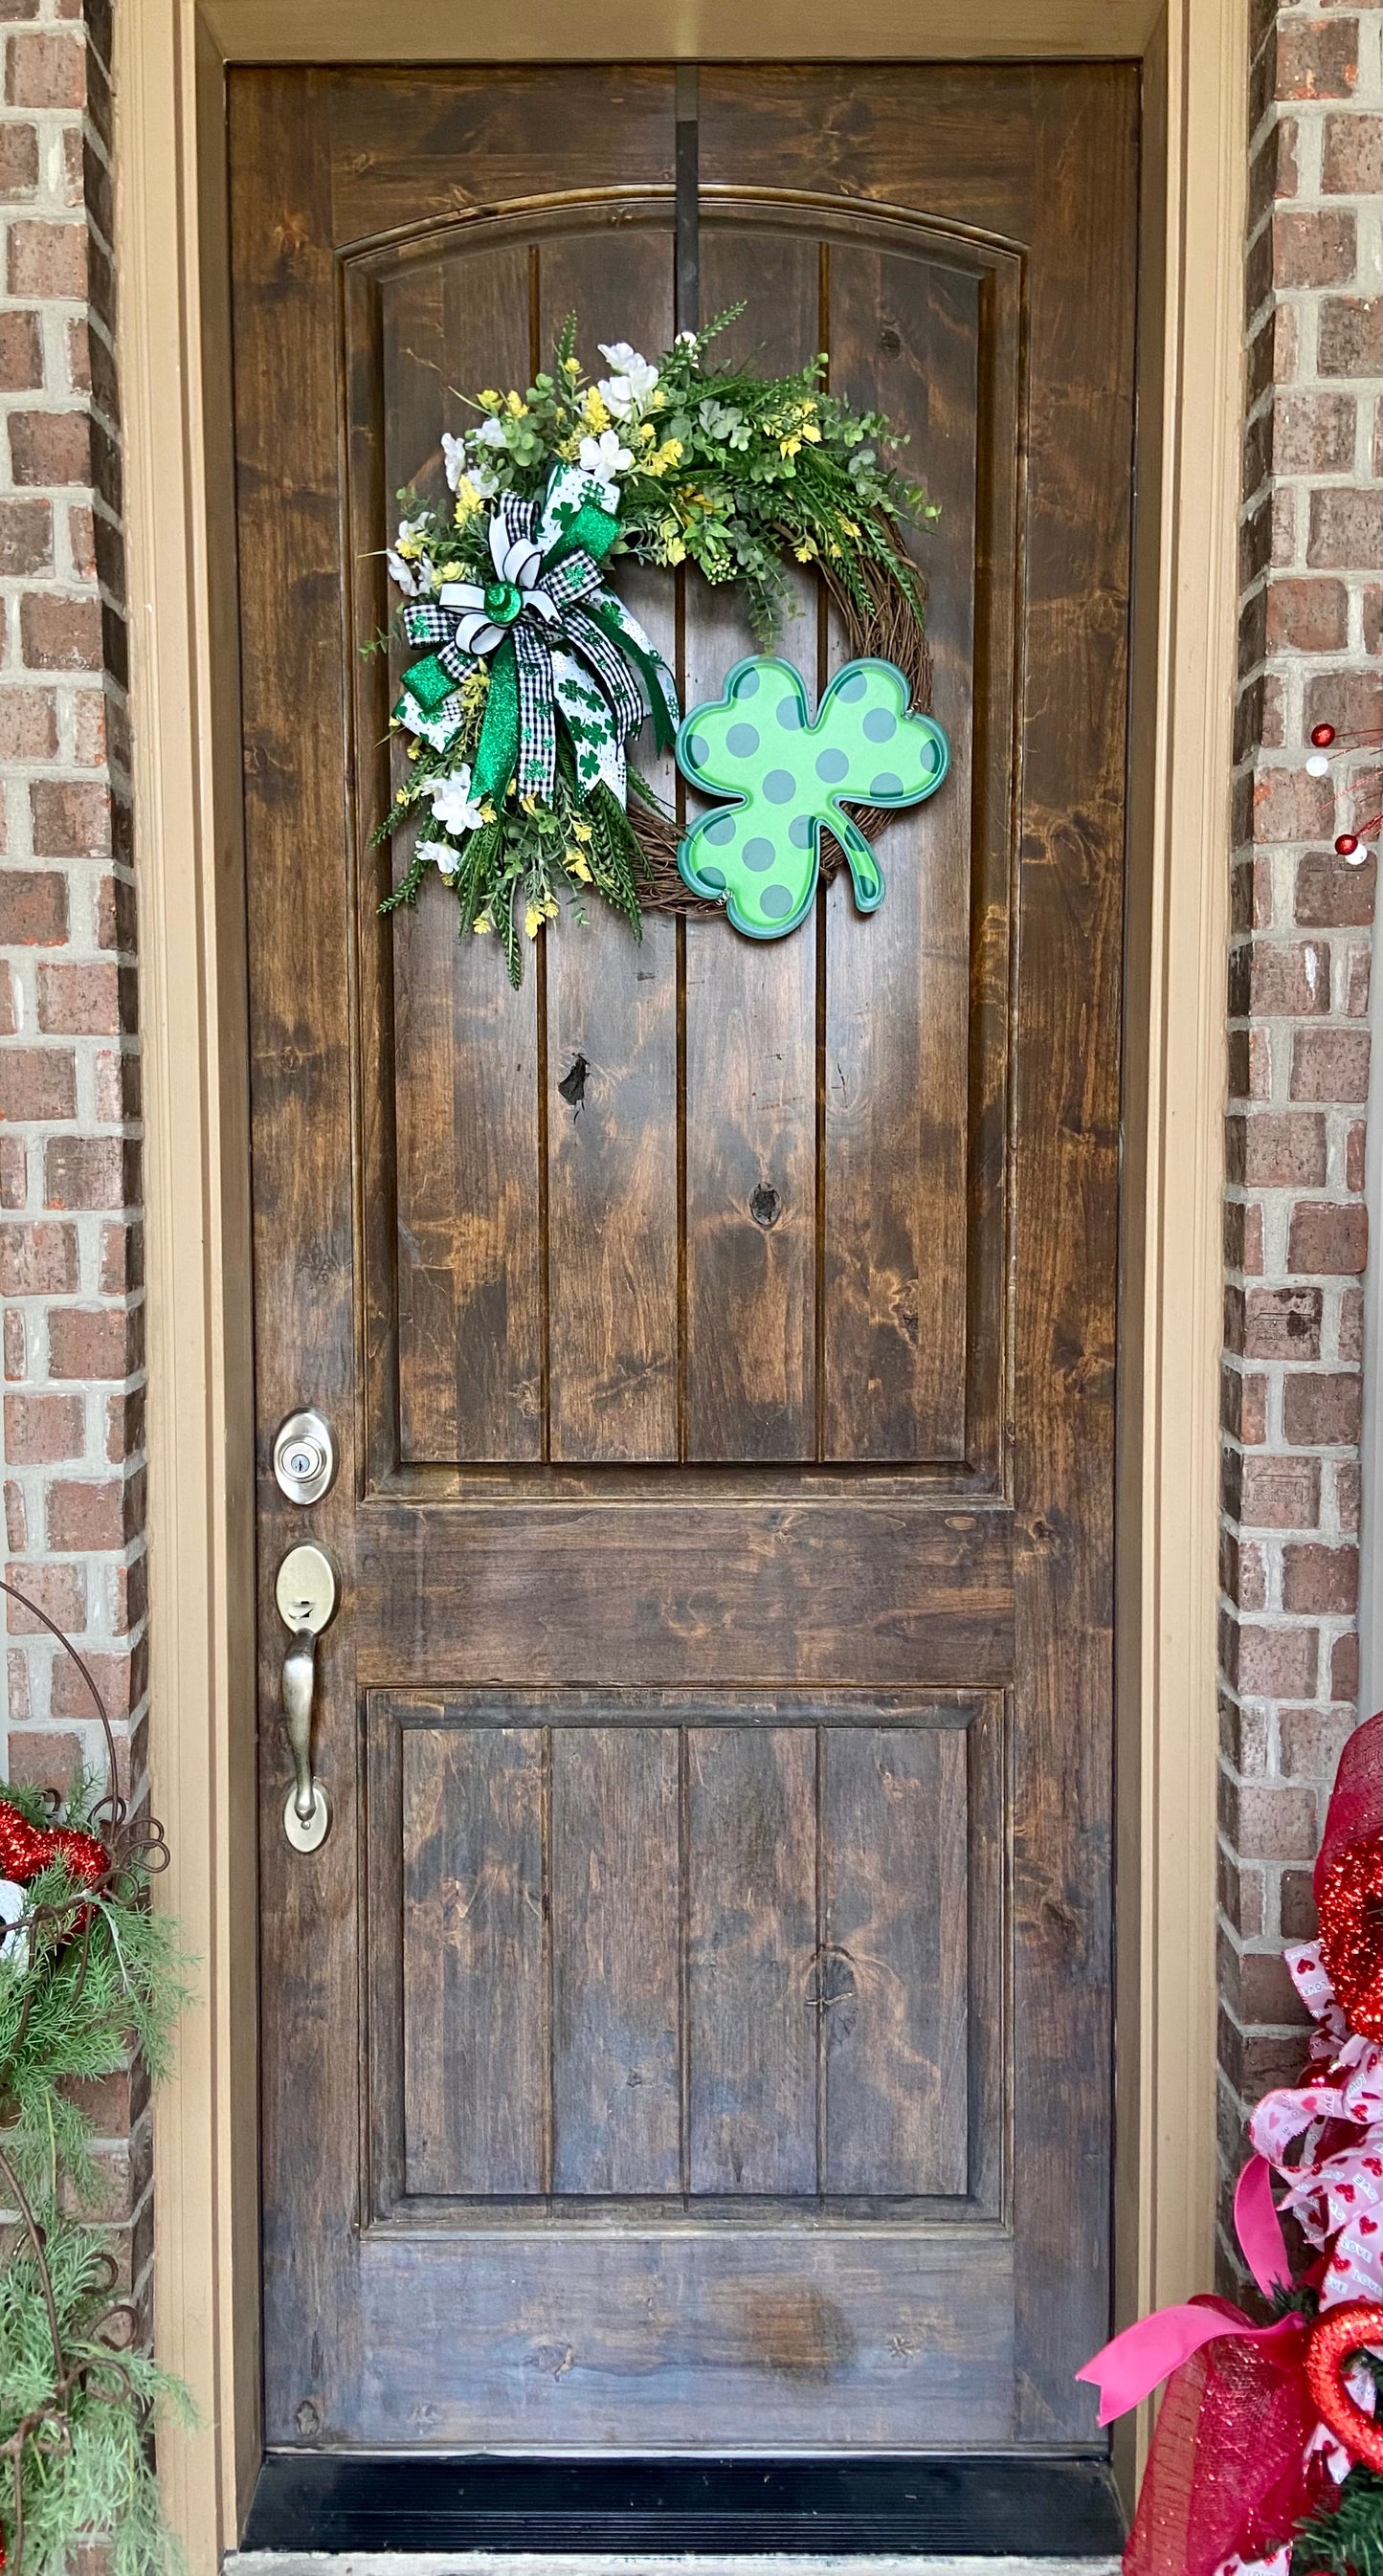 St. Patrick's Day Wreath Made to Order